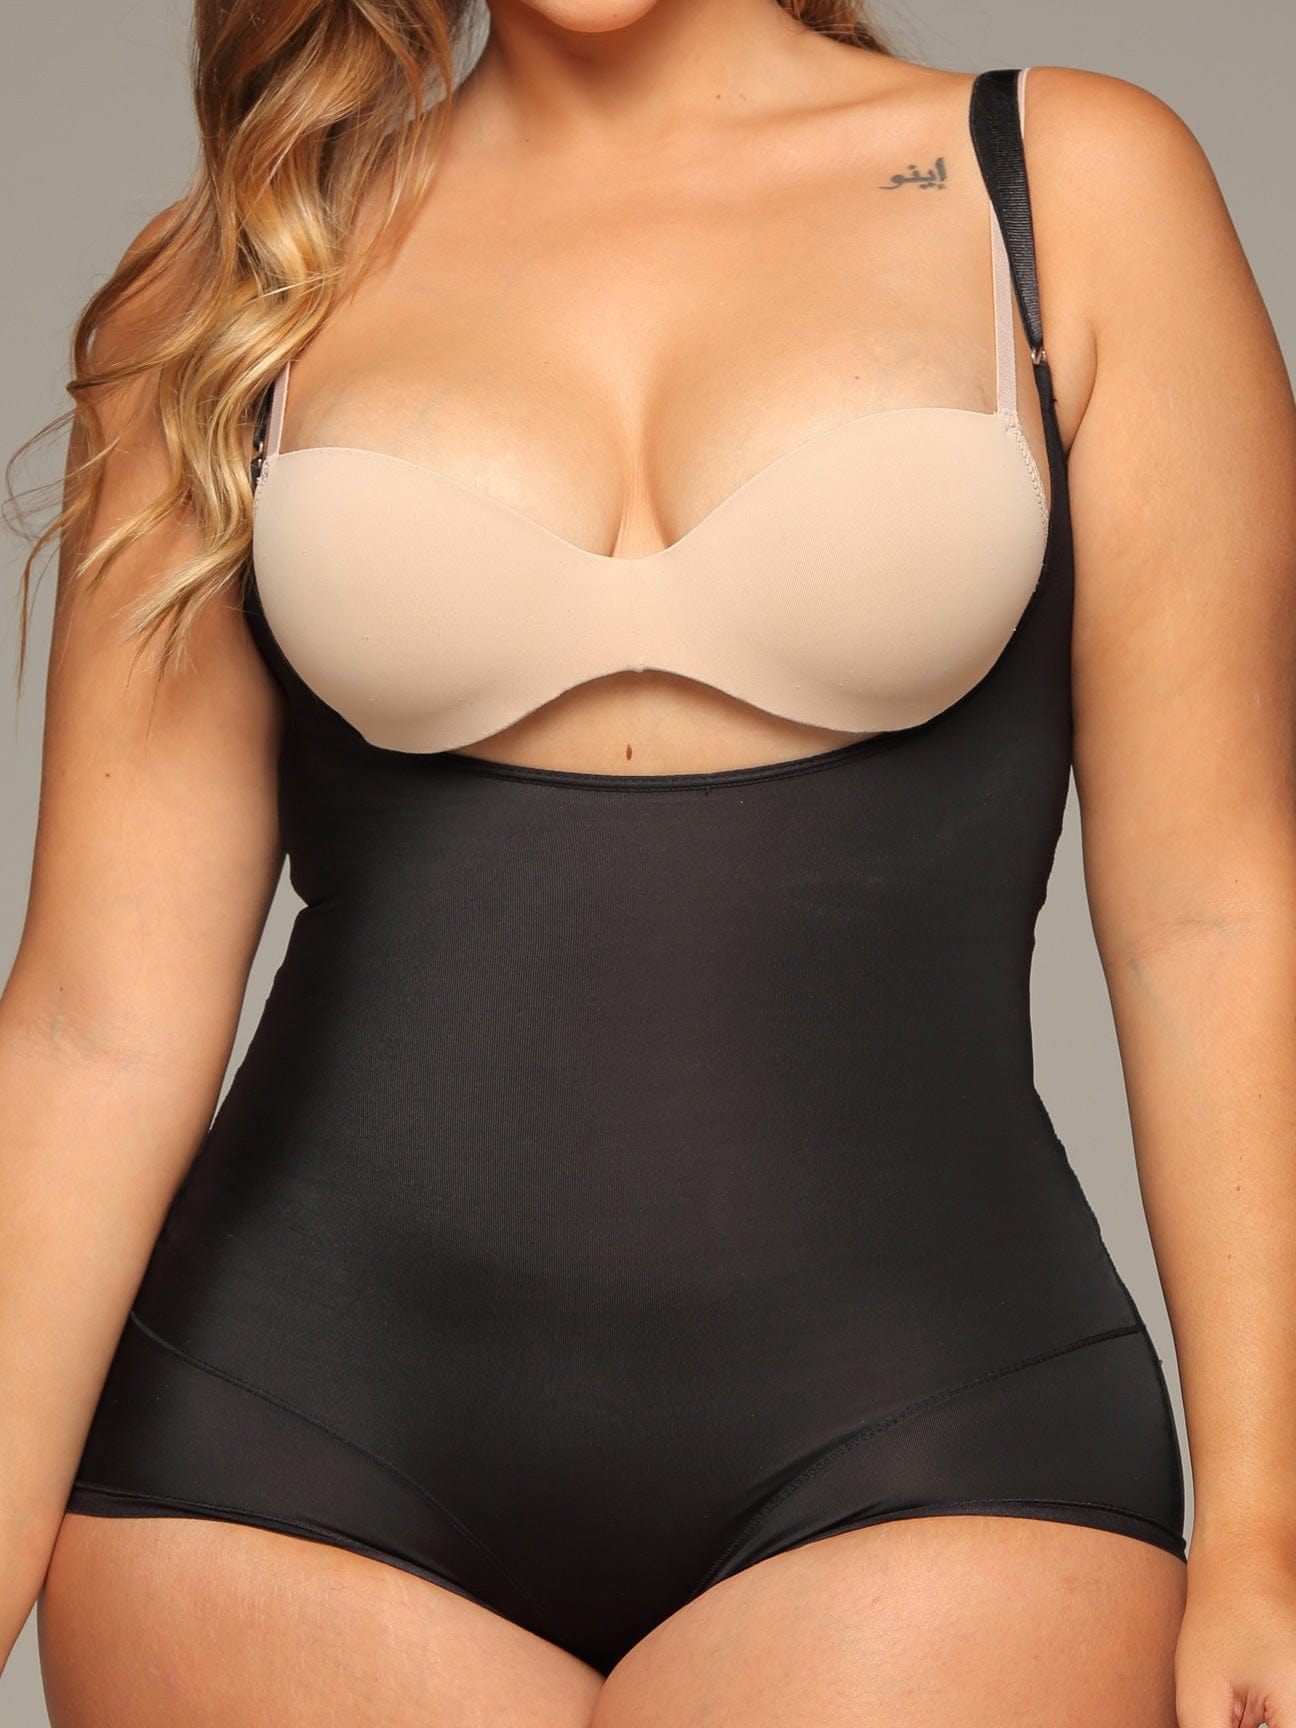 Plus Size XS-5XL Slimming Seamless Invisible Full Body Shaper High Waist  Lose Weight Tummy Control Shapewear Waist Trainer Ultra Strong Shaping  Pants Underwear